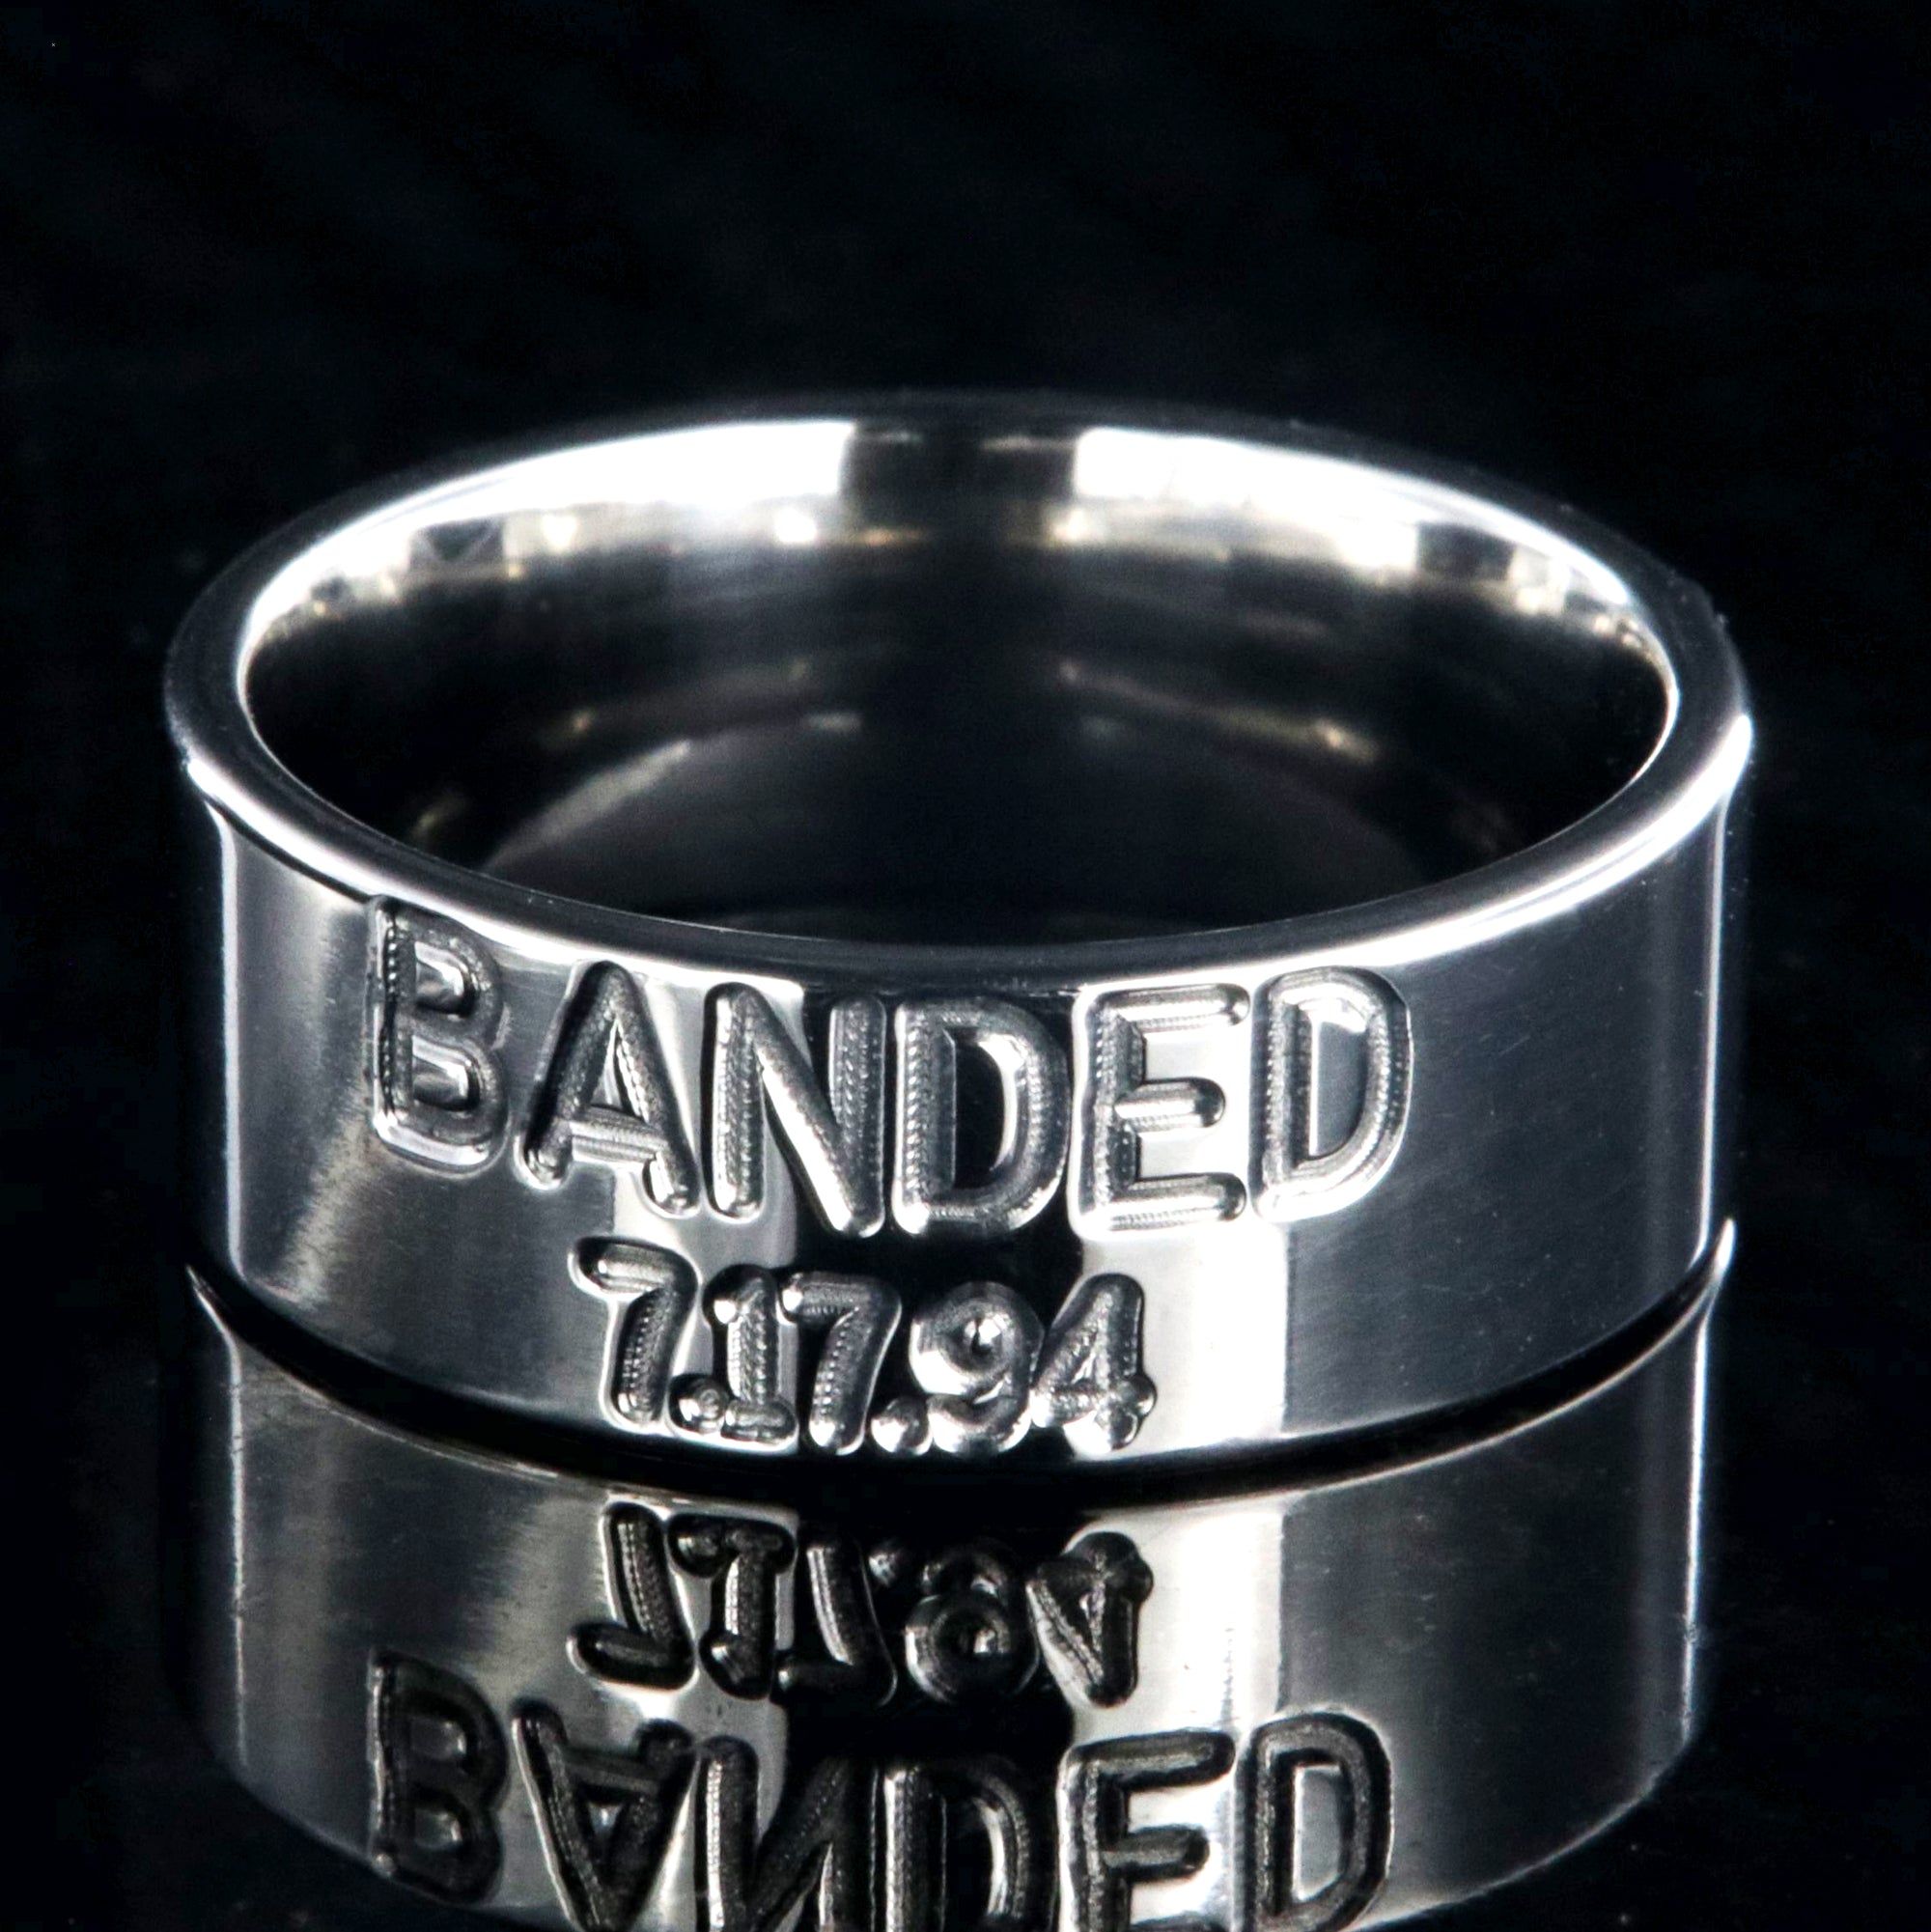 8mm wide titanium duck band wedding ring with 2 lines of text